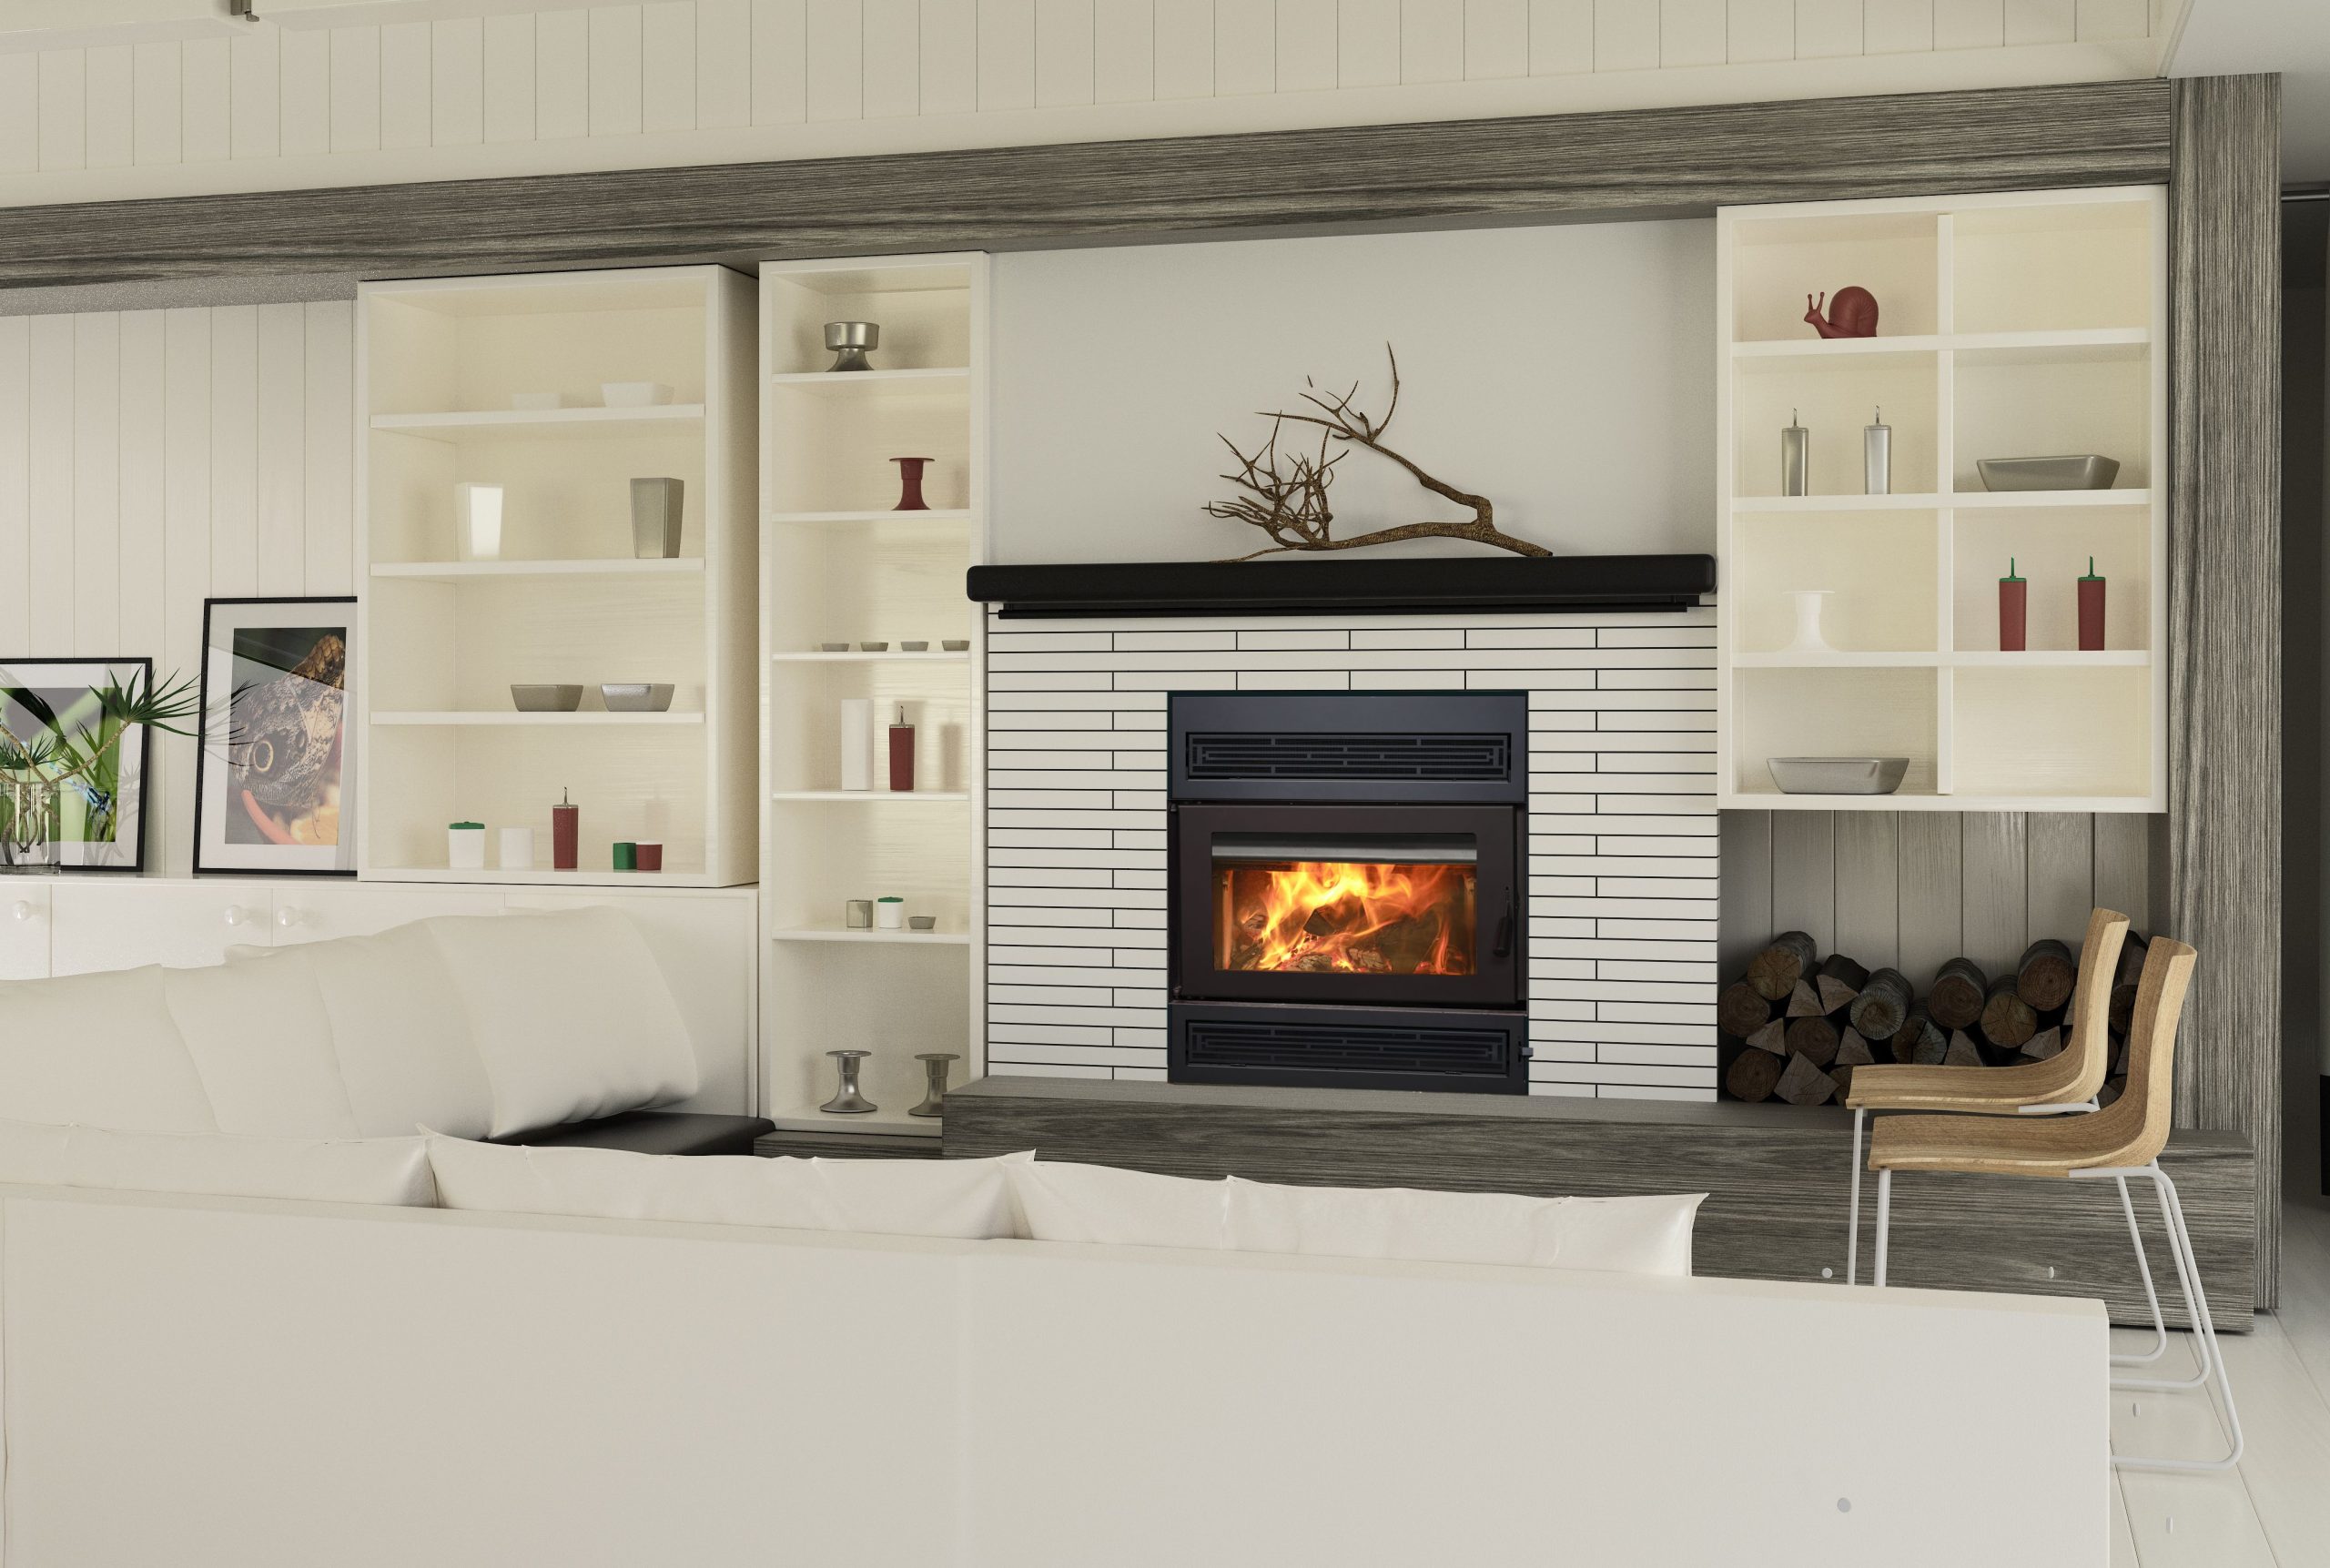 How to Increase the Efficiency of Your Fireplace